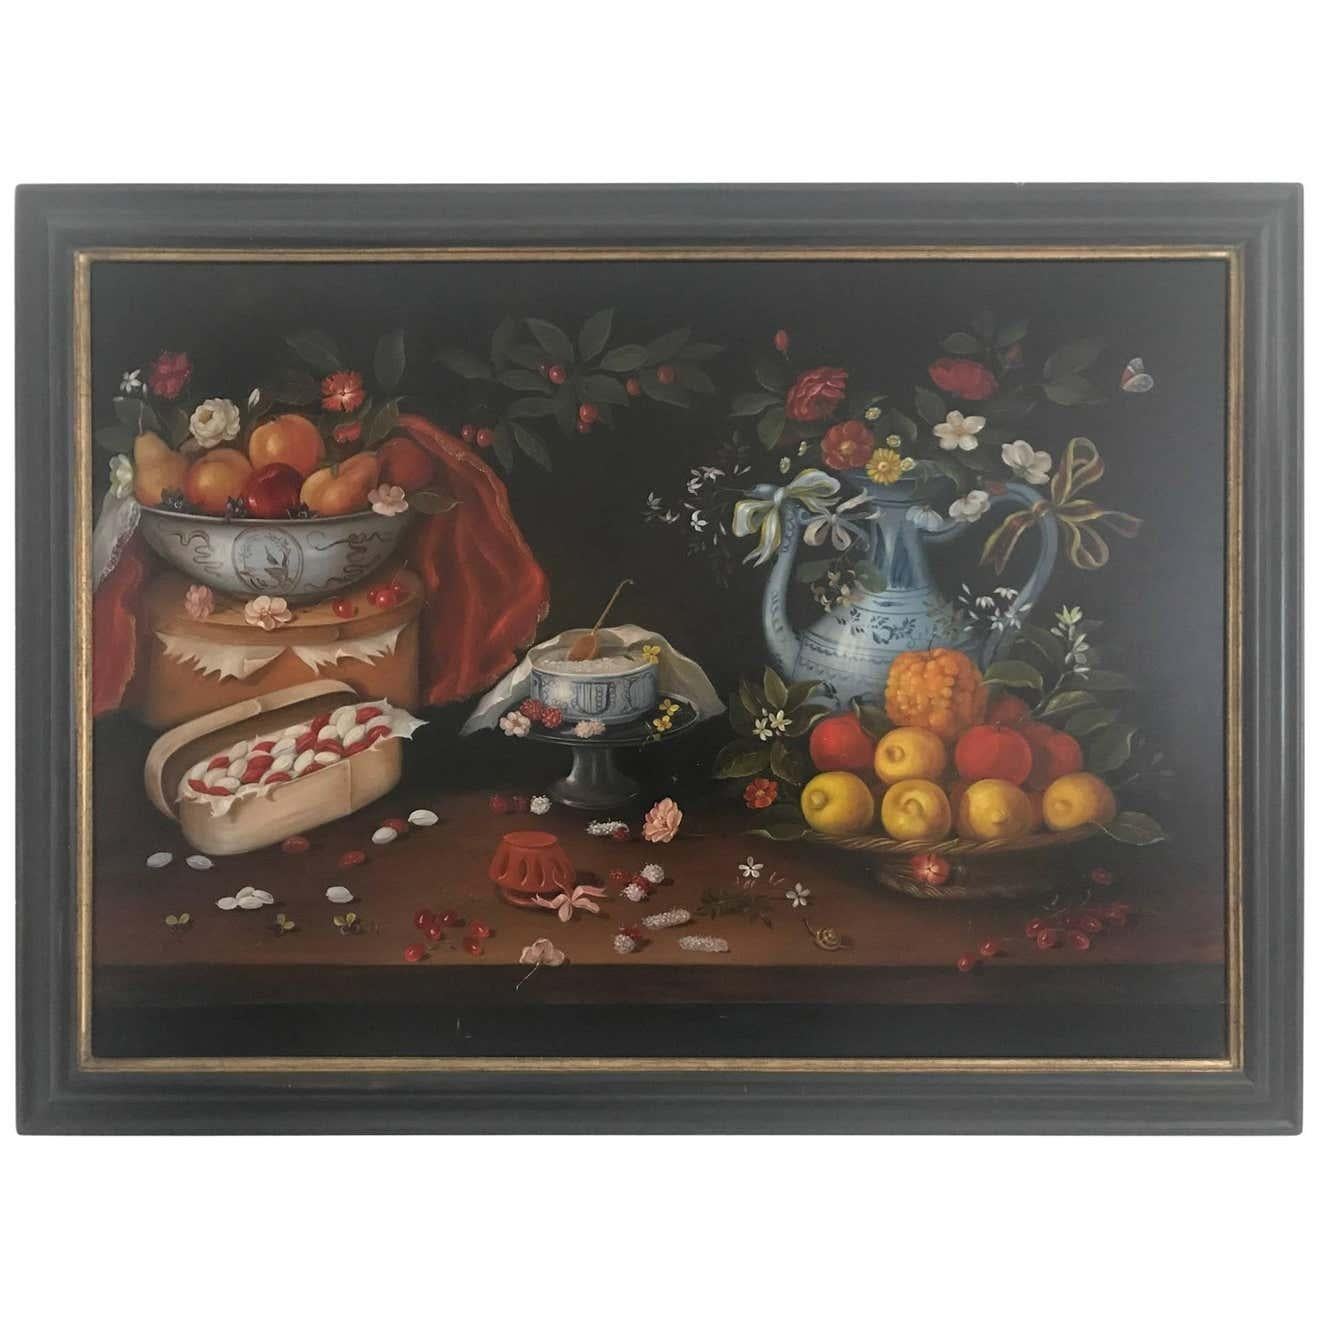 Italian school late 20th century still life of fruit flowers and pottery. In the earliest years of the 20th century the still life genre underwent something of a Renaissance. As artists became increasingly concerned with purely formal, pictorial